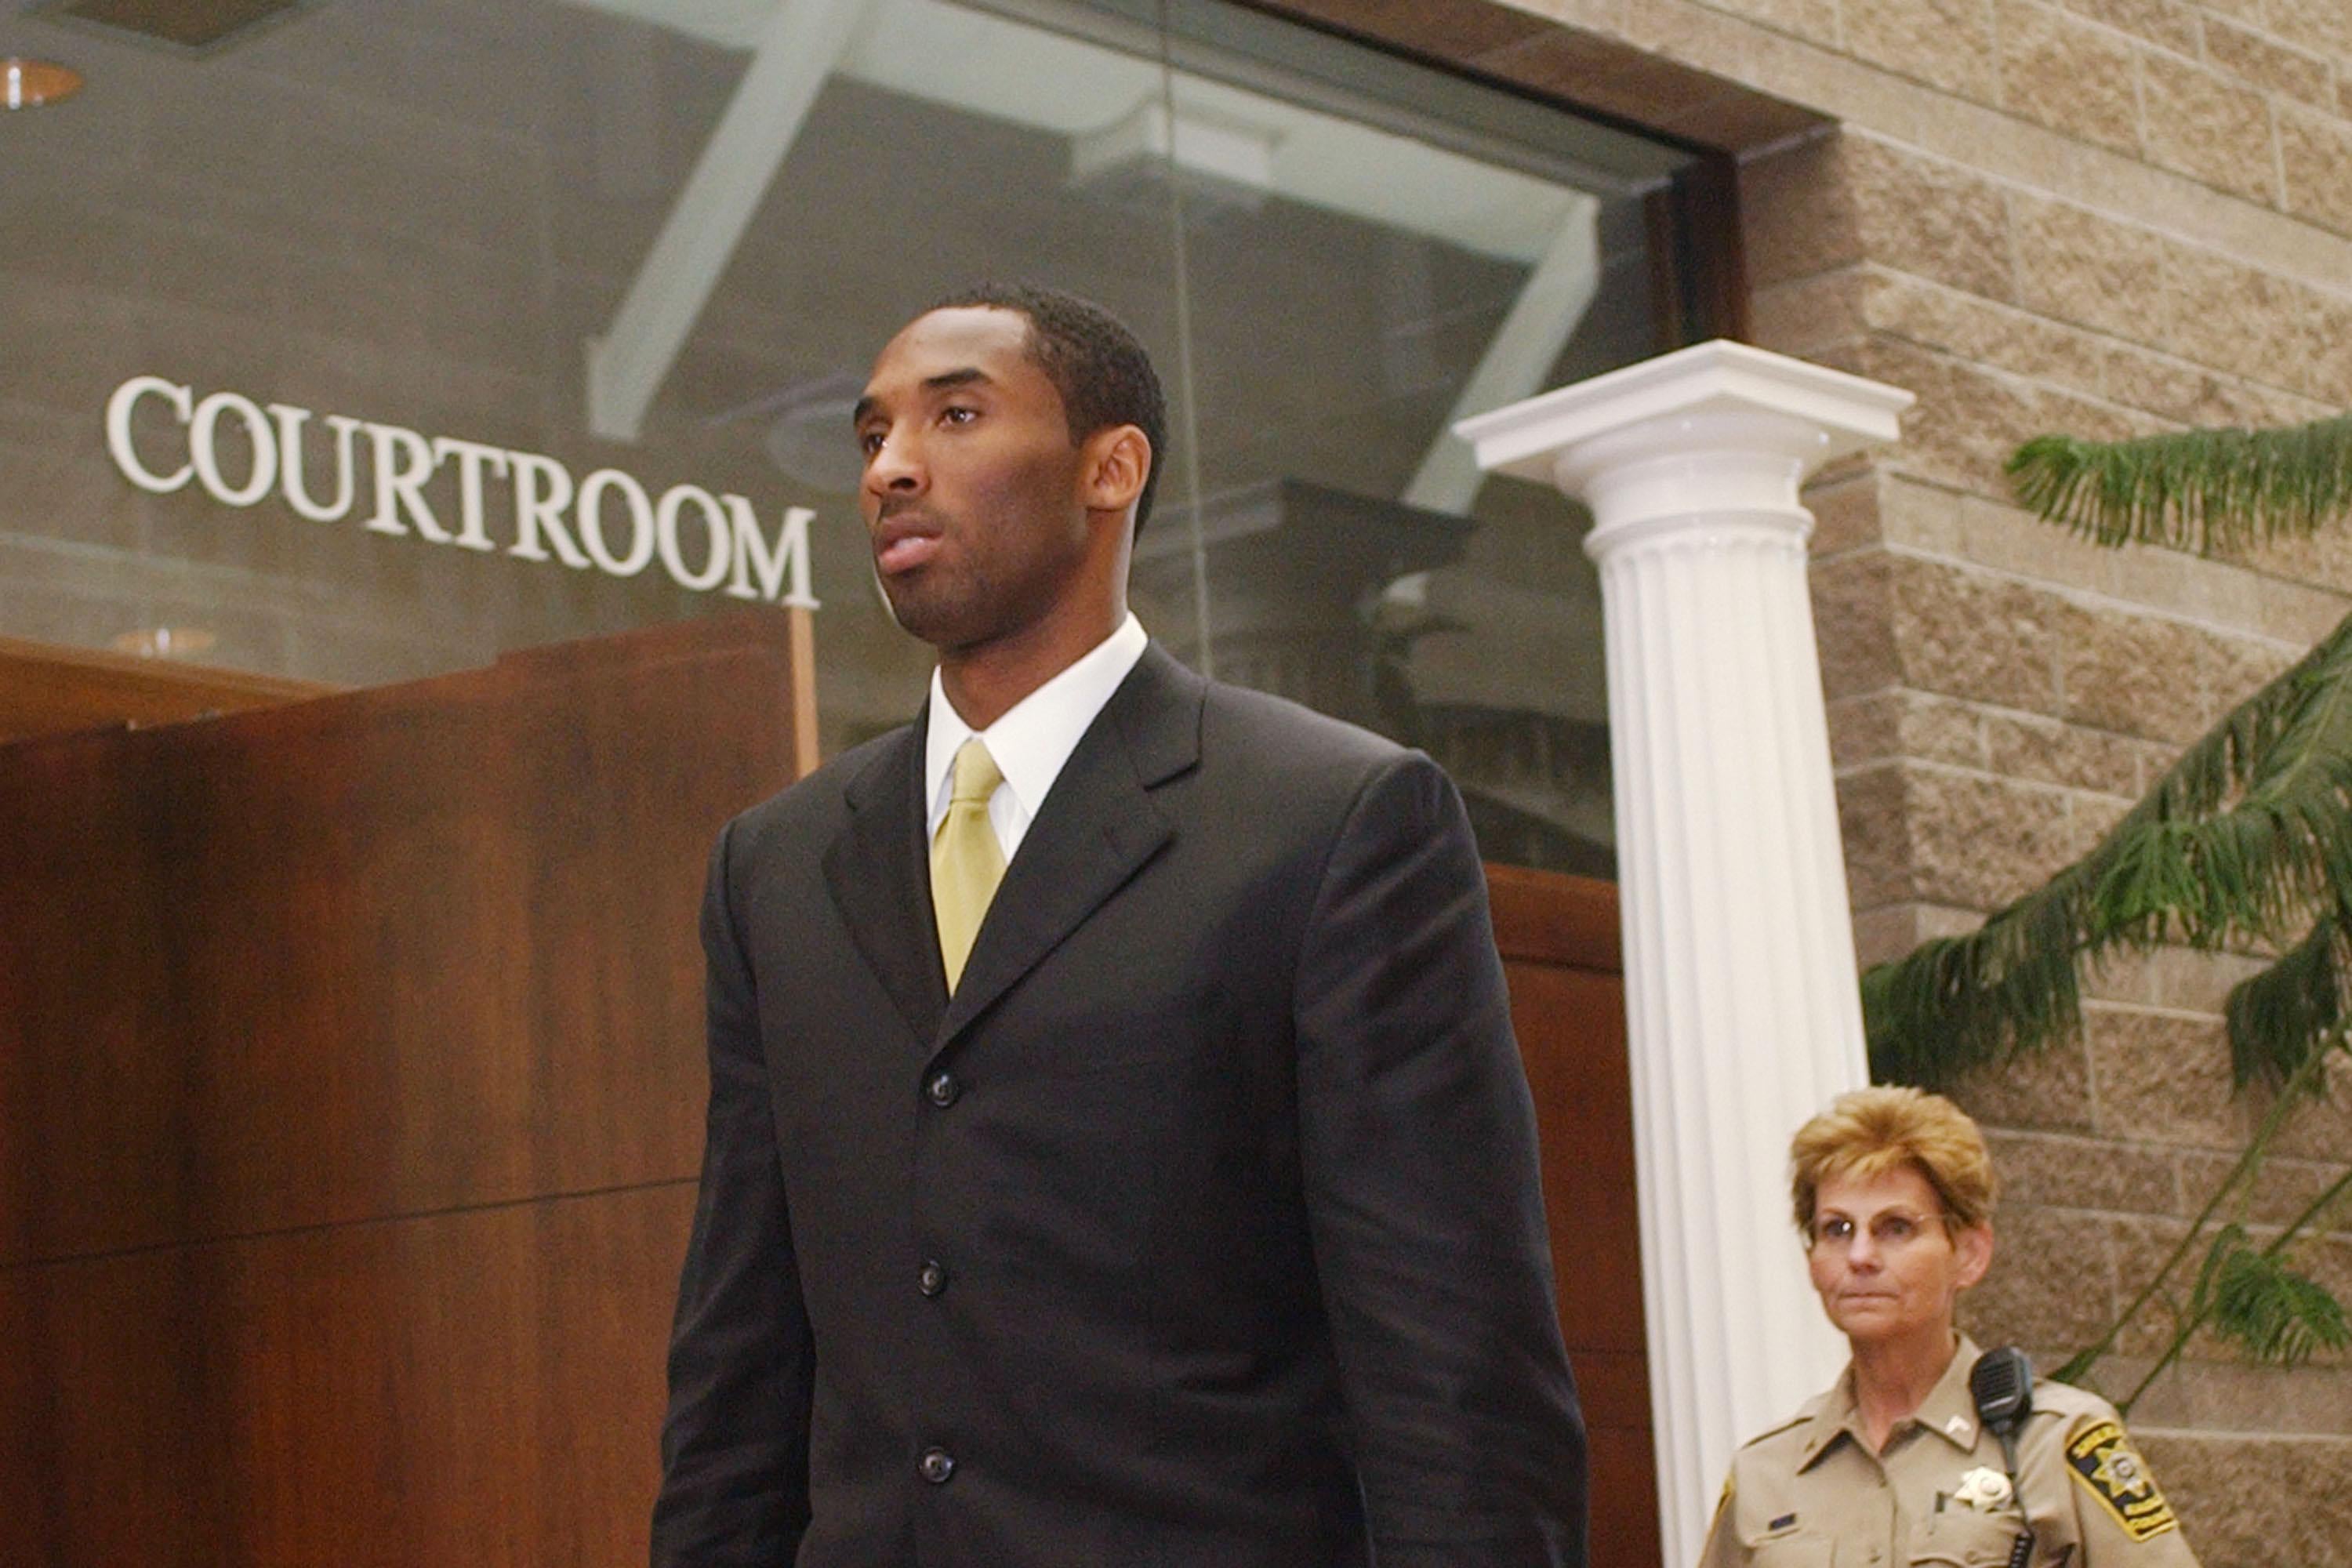 Kobe Bryant, in a suit, walks under a wall that says "Courtroom" as a woman in a law enforcement uniform stands behind him.